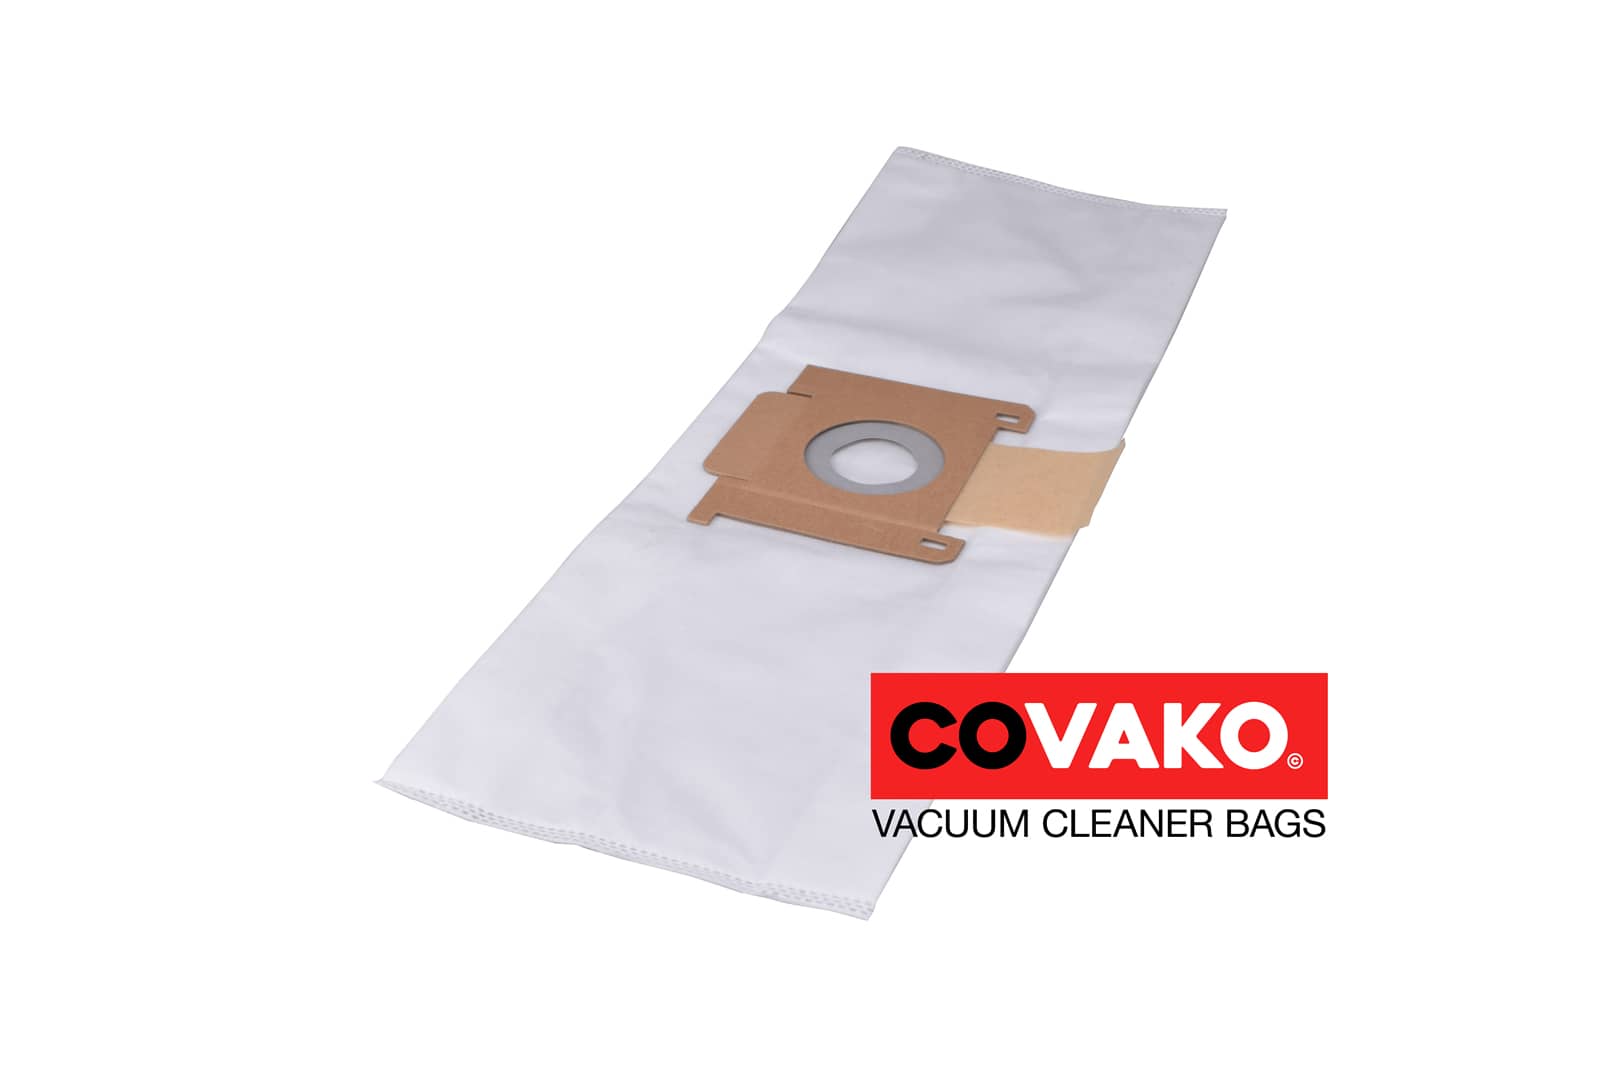 Comac tito 6 / Synthesis - Comac vacuum cleaner bags